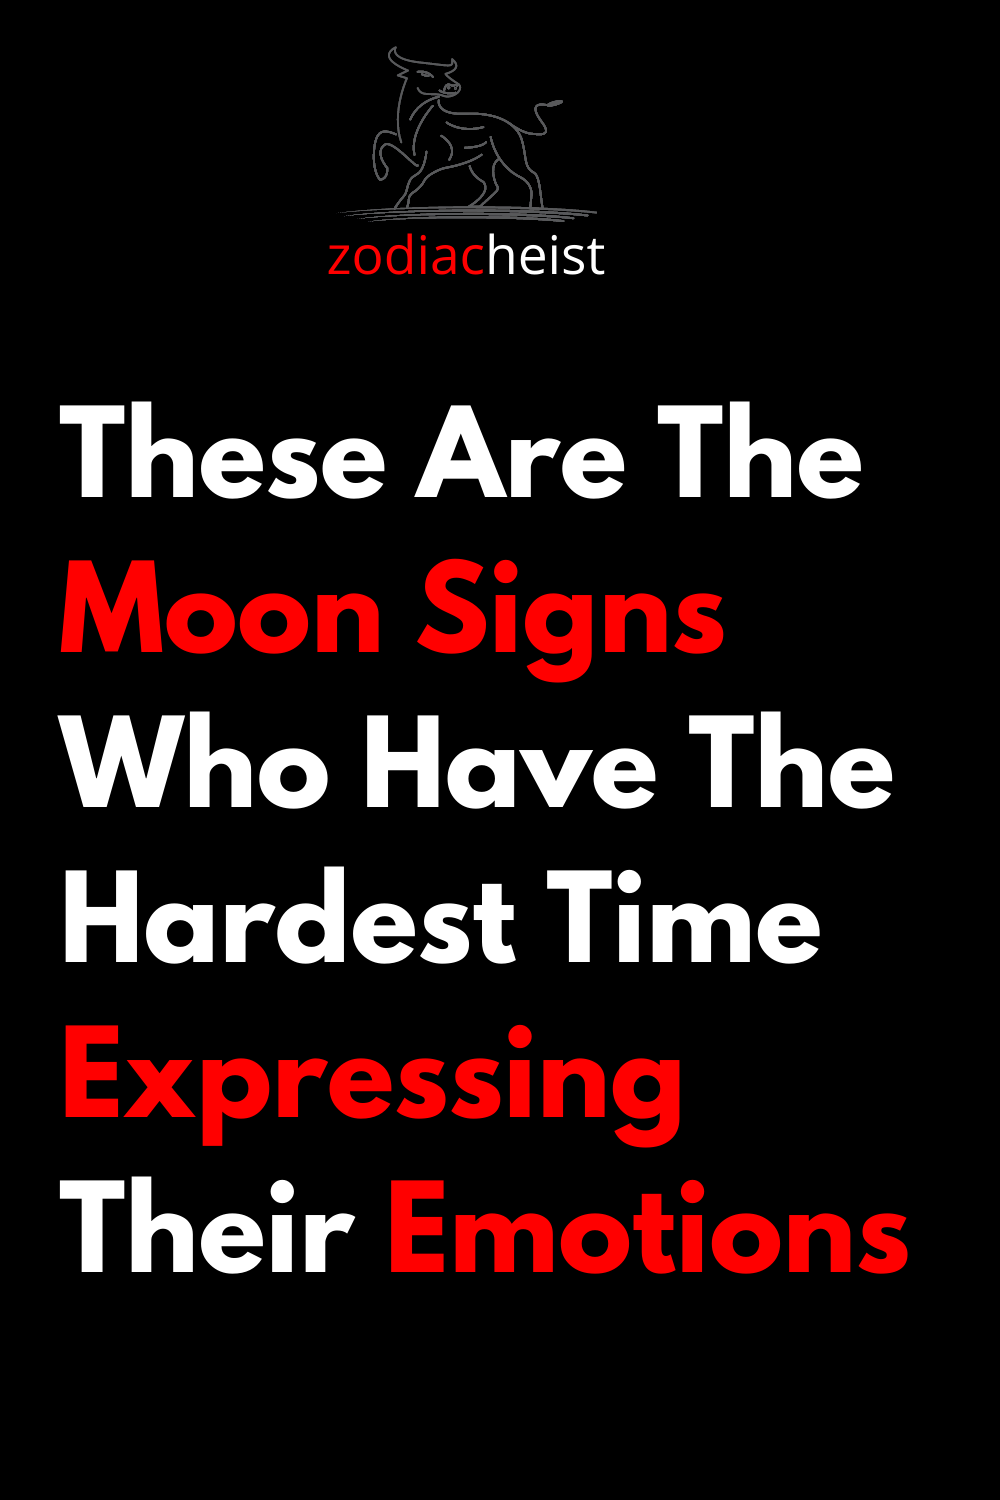 These Are The Moon Signs Who Have The Hardest Time Expressing Their Emotions